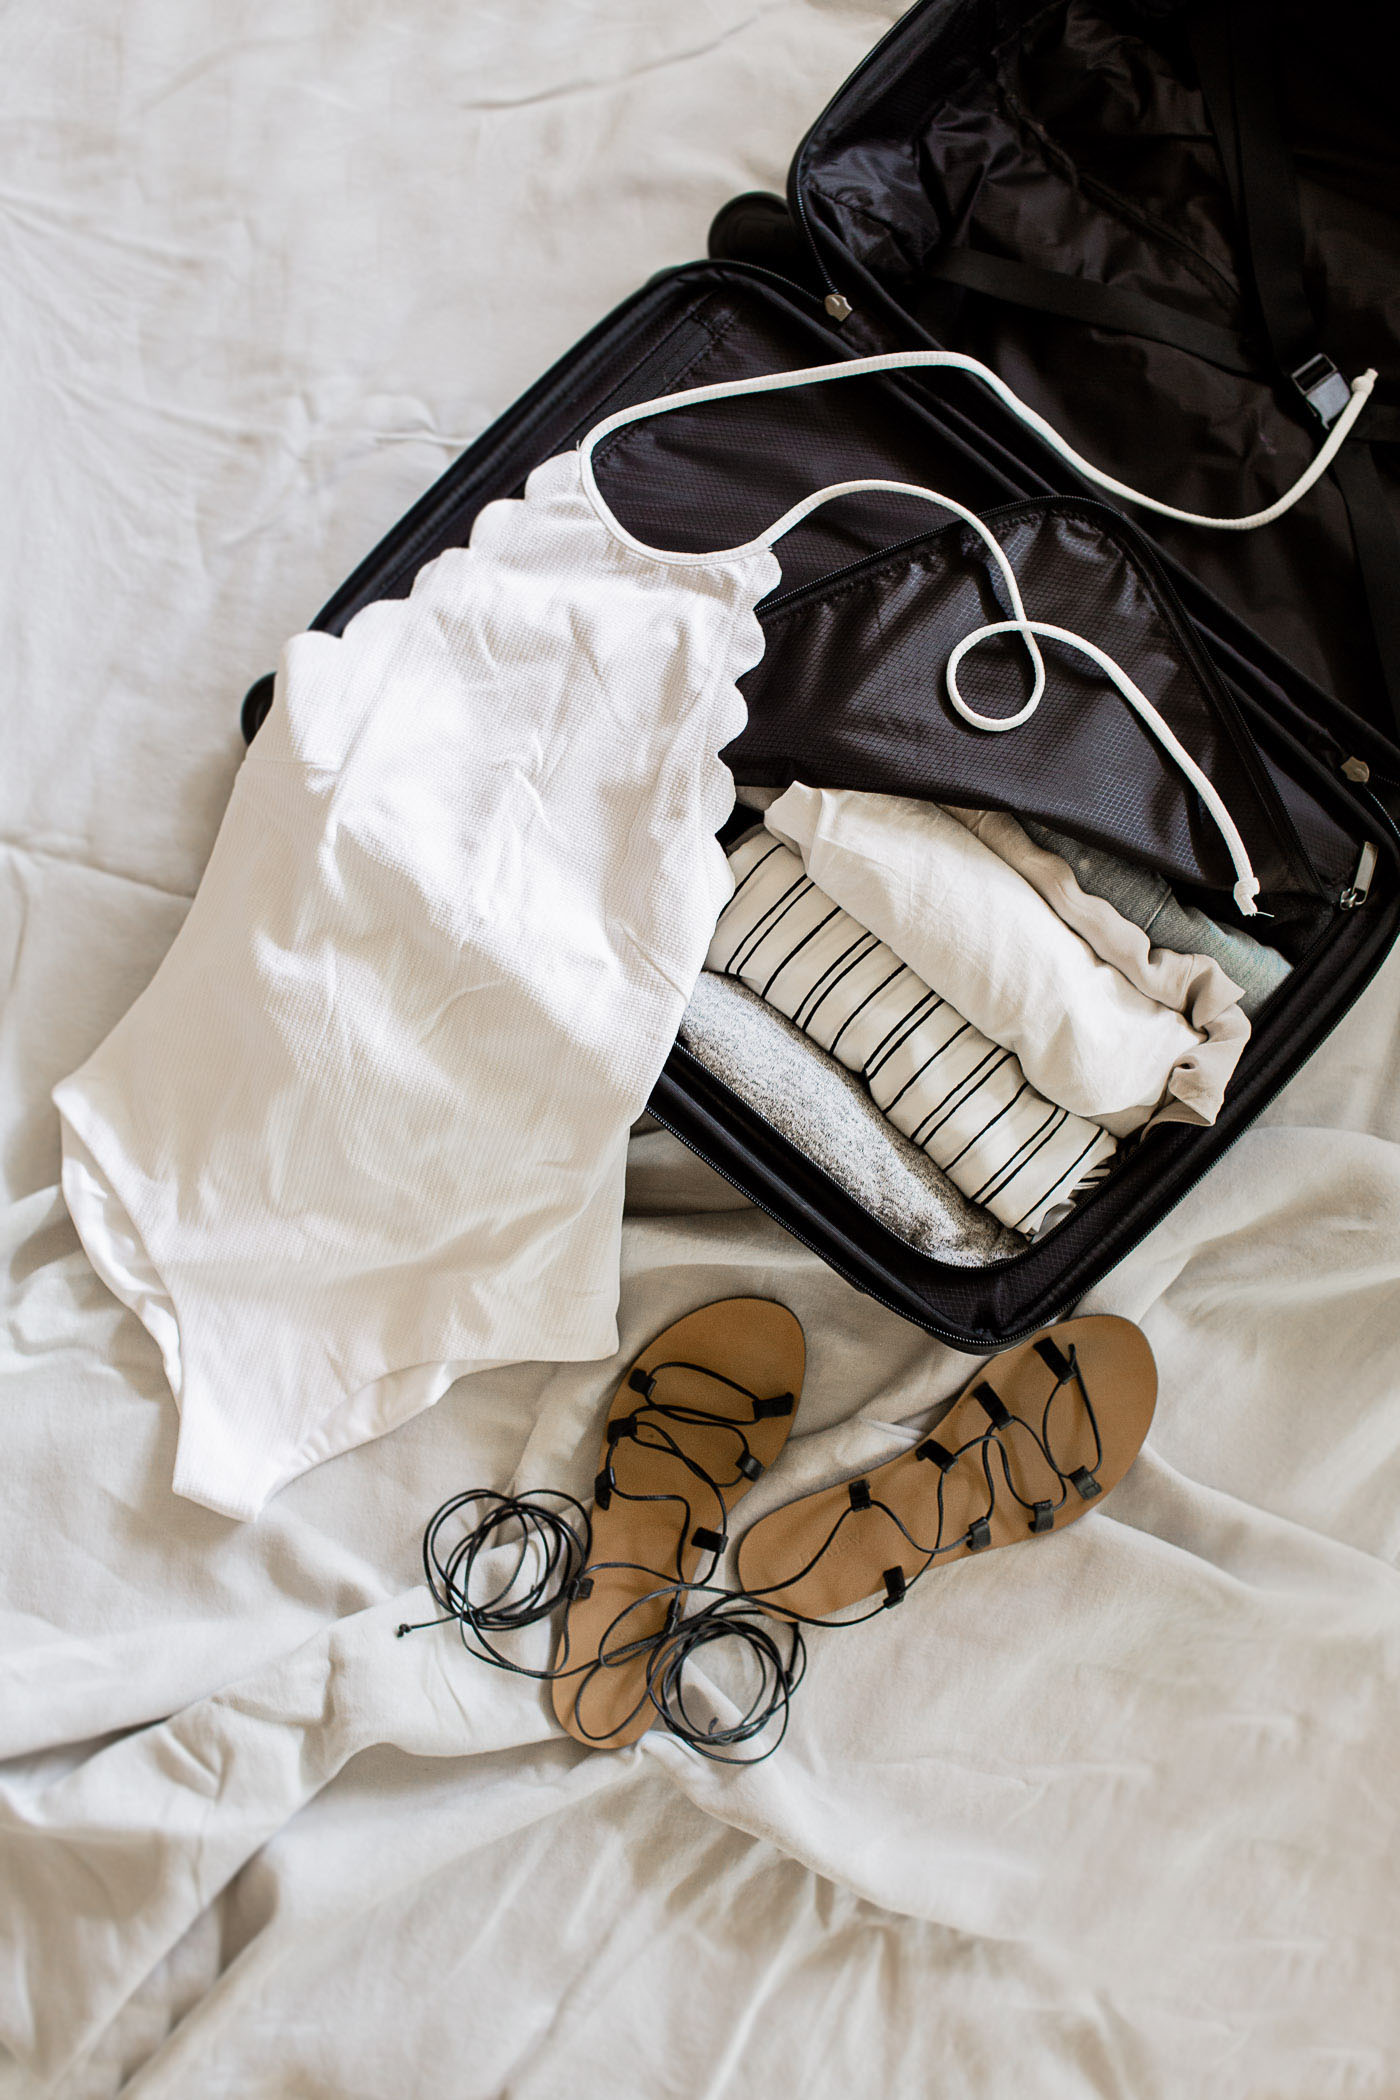 5 easy tips for how to make extra room in your suitcase, for your flight home or souvenirs, or just to pack a few necessities.